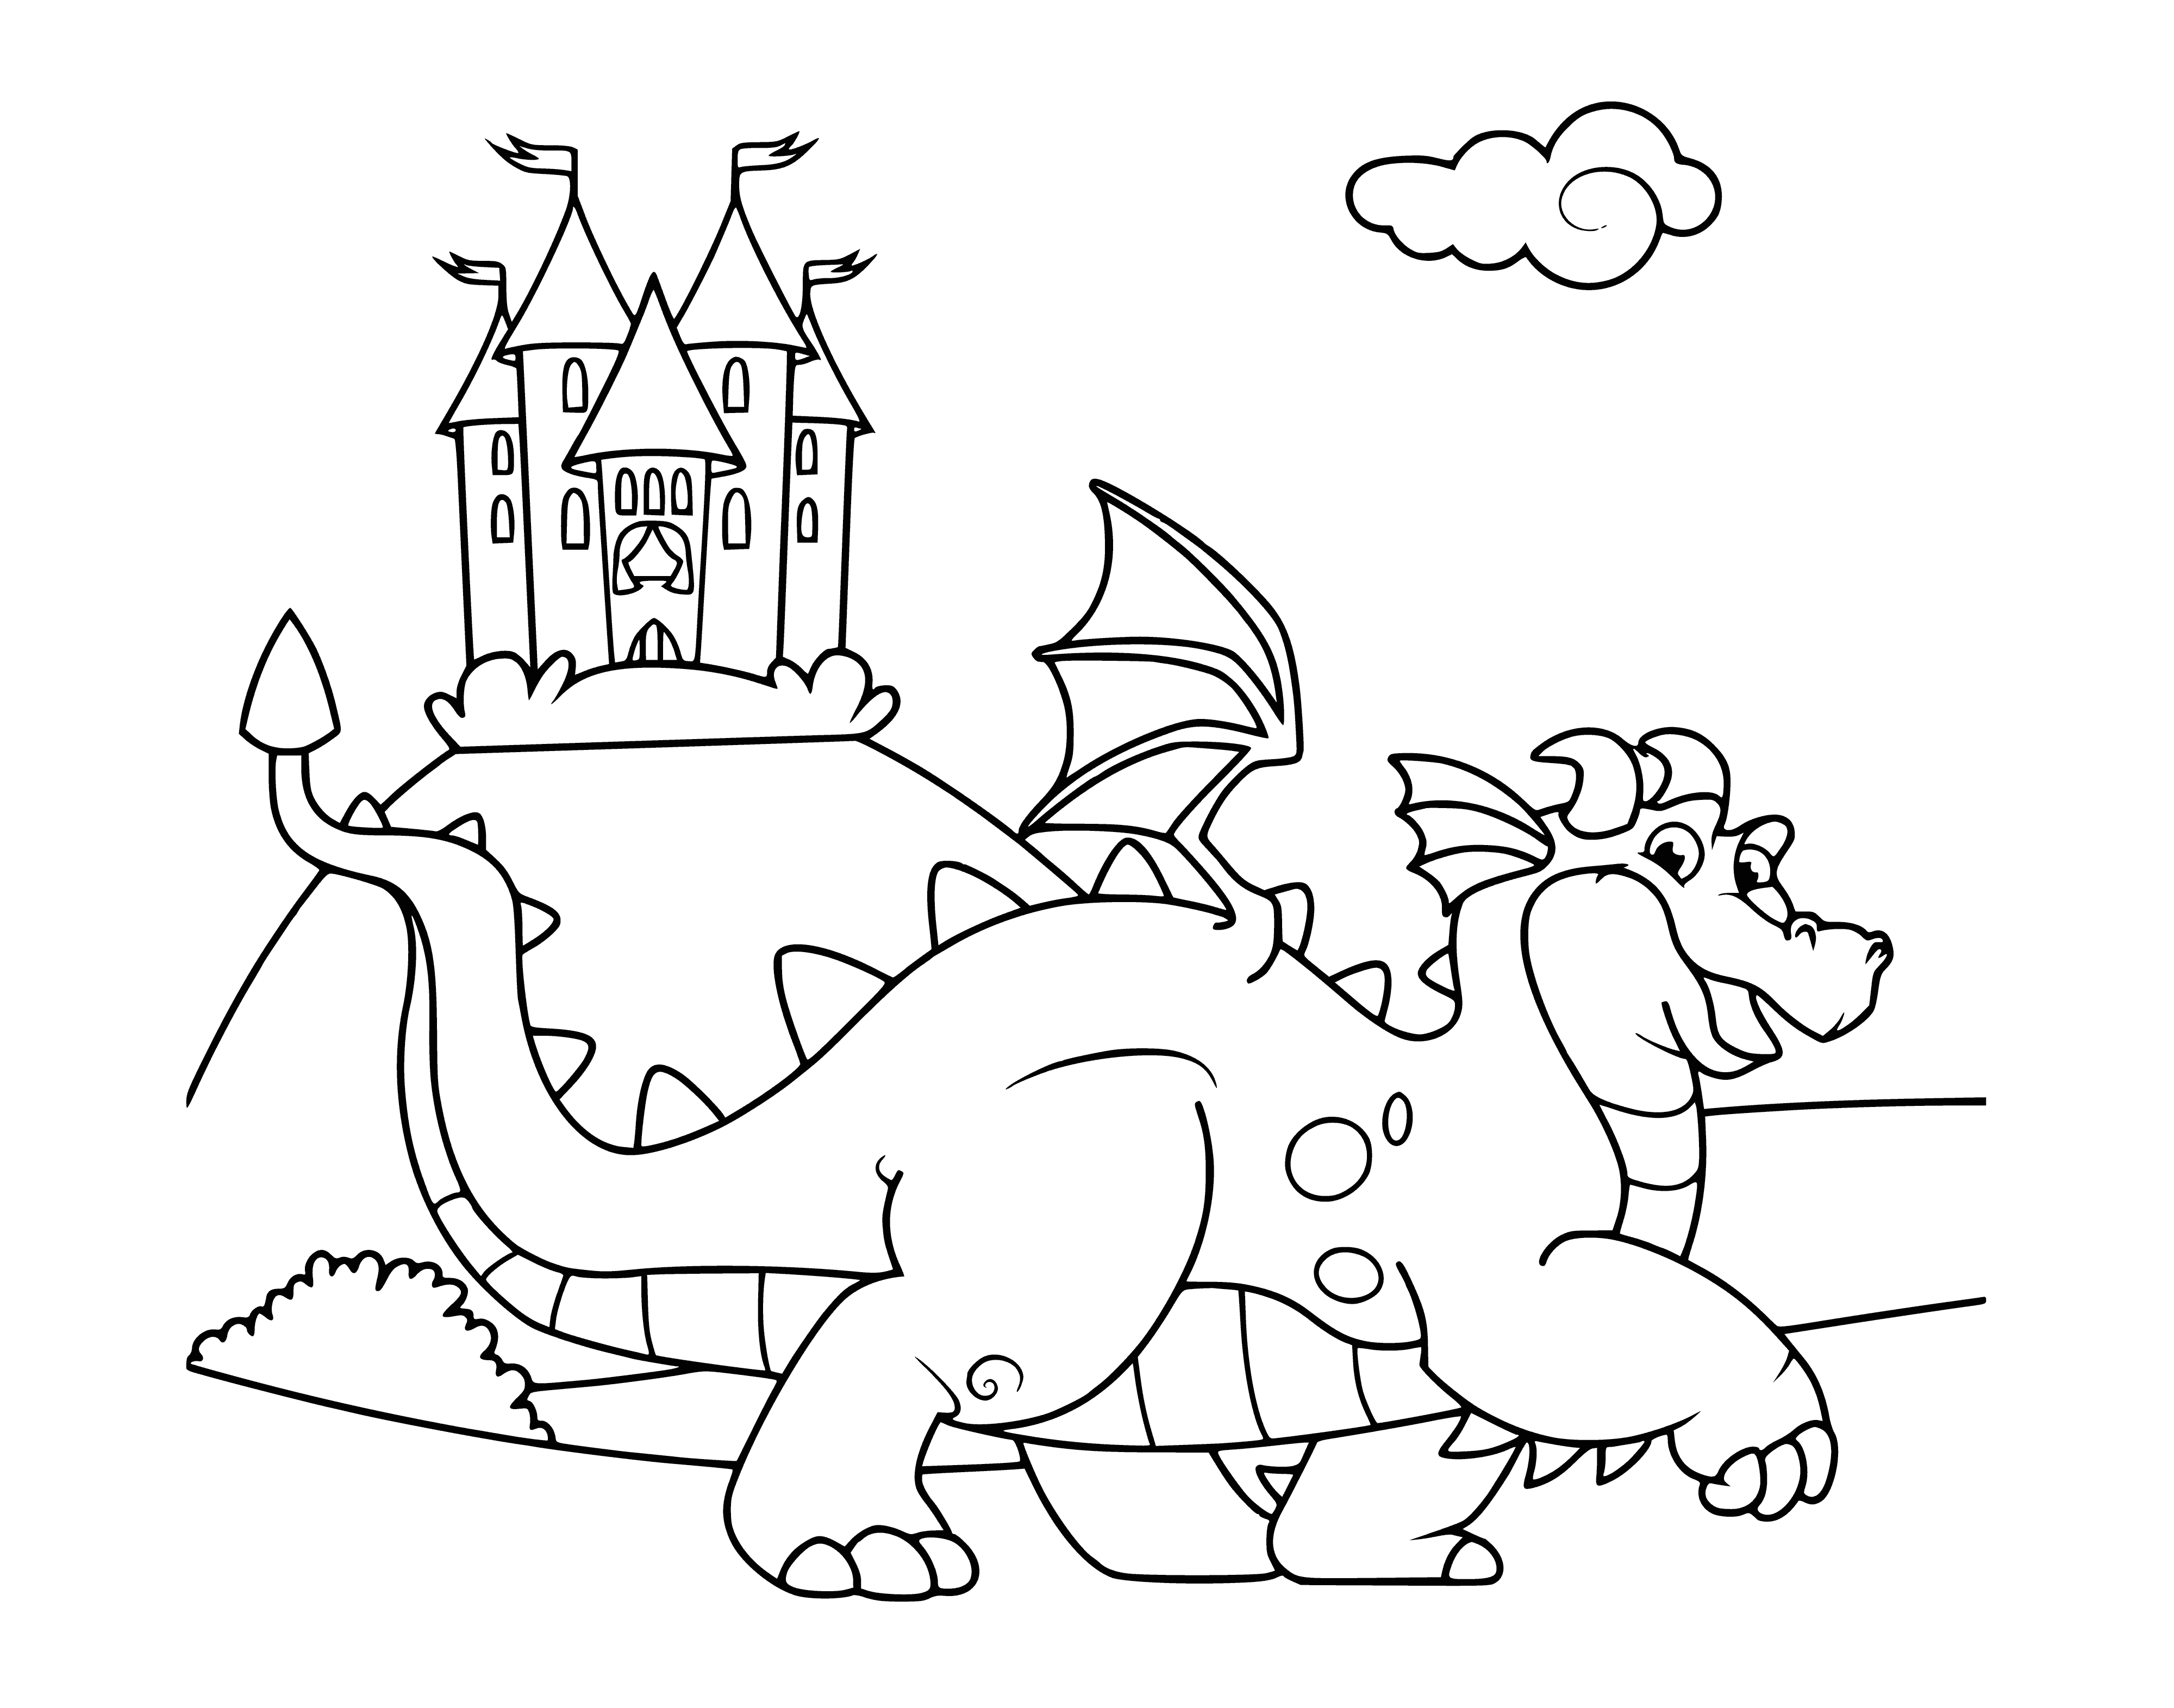 coloring page: The dragon majestically guards castle and its people. Its claws and teeth make it a powerful sight, yet it is also loyal to those it protects.